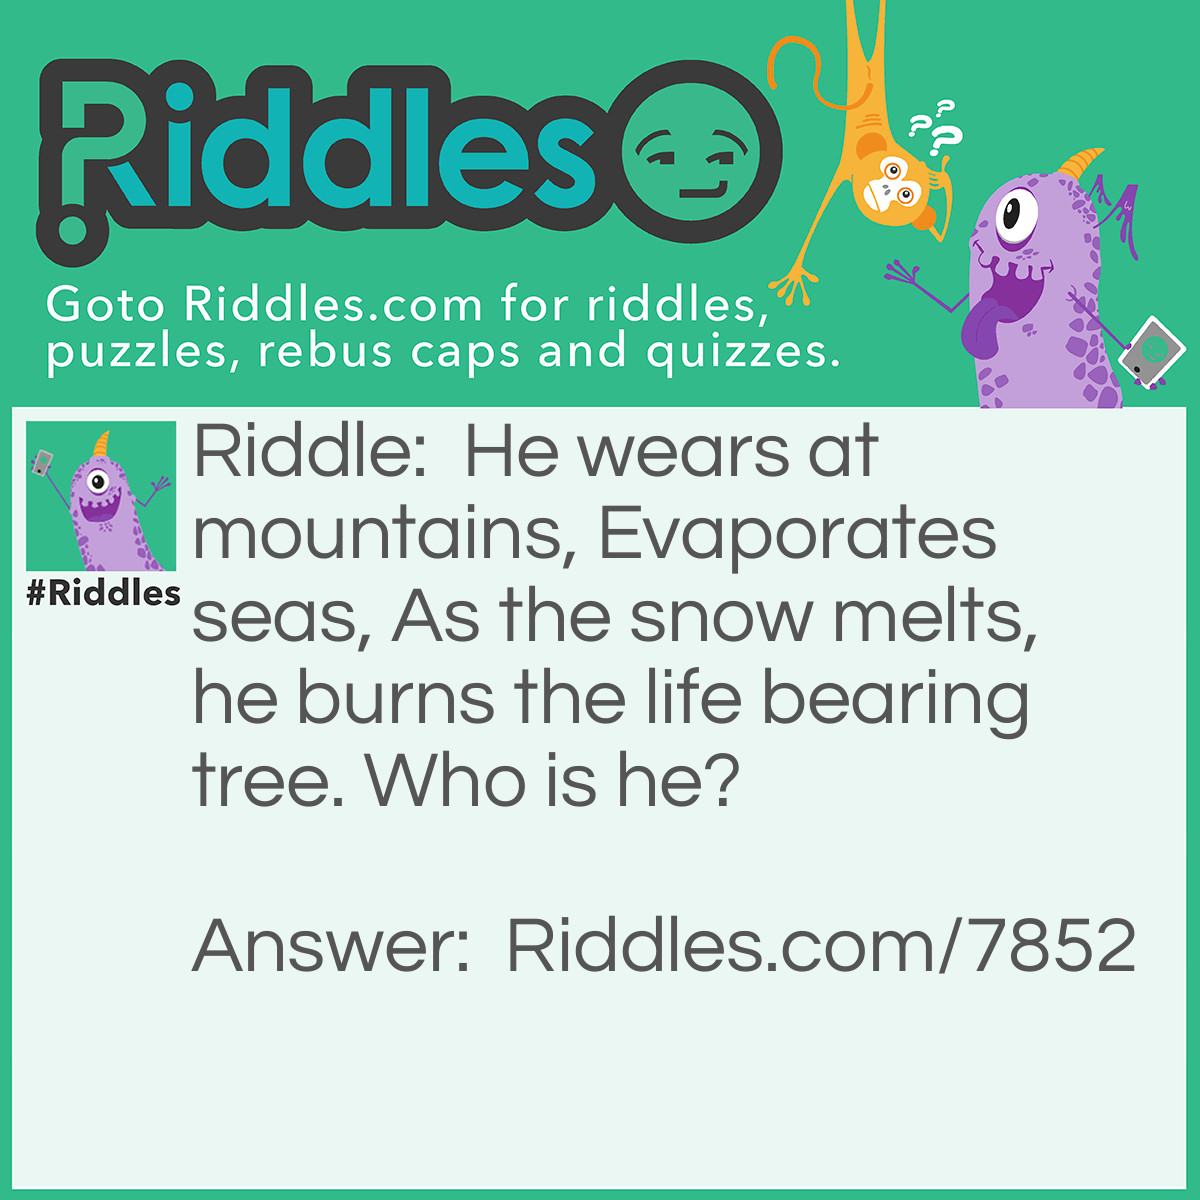 Riddle: He wears at mountains, Evaporates seas, As the snow melts, he burns the life bearing tree. Who is he? Answer: The answer is time, because it makes mountains weather away, and as time goes on the seas will evaporate, and as global warming intensifies, the human tree of life burns away. Bet you thought it was heat.